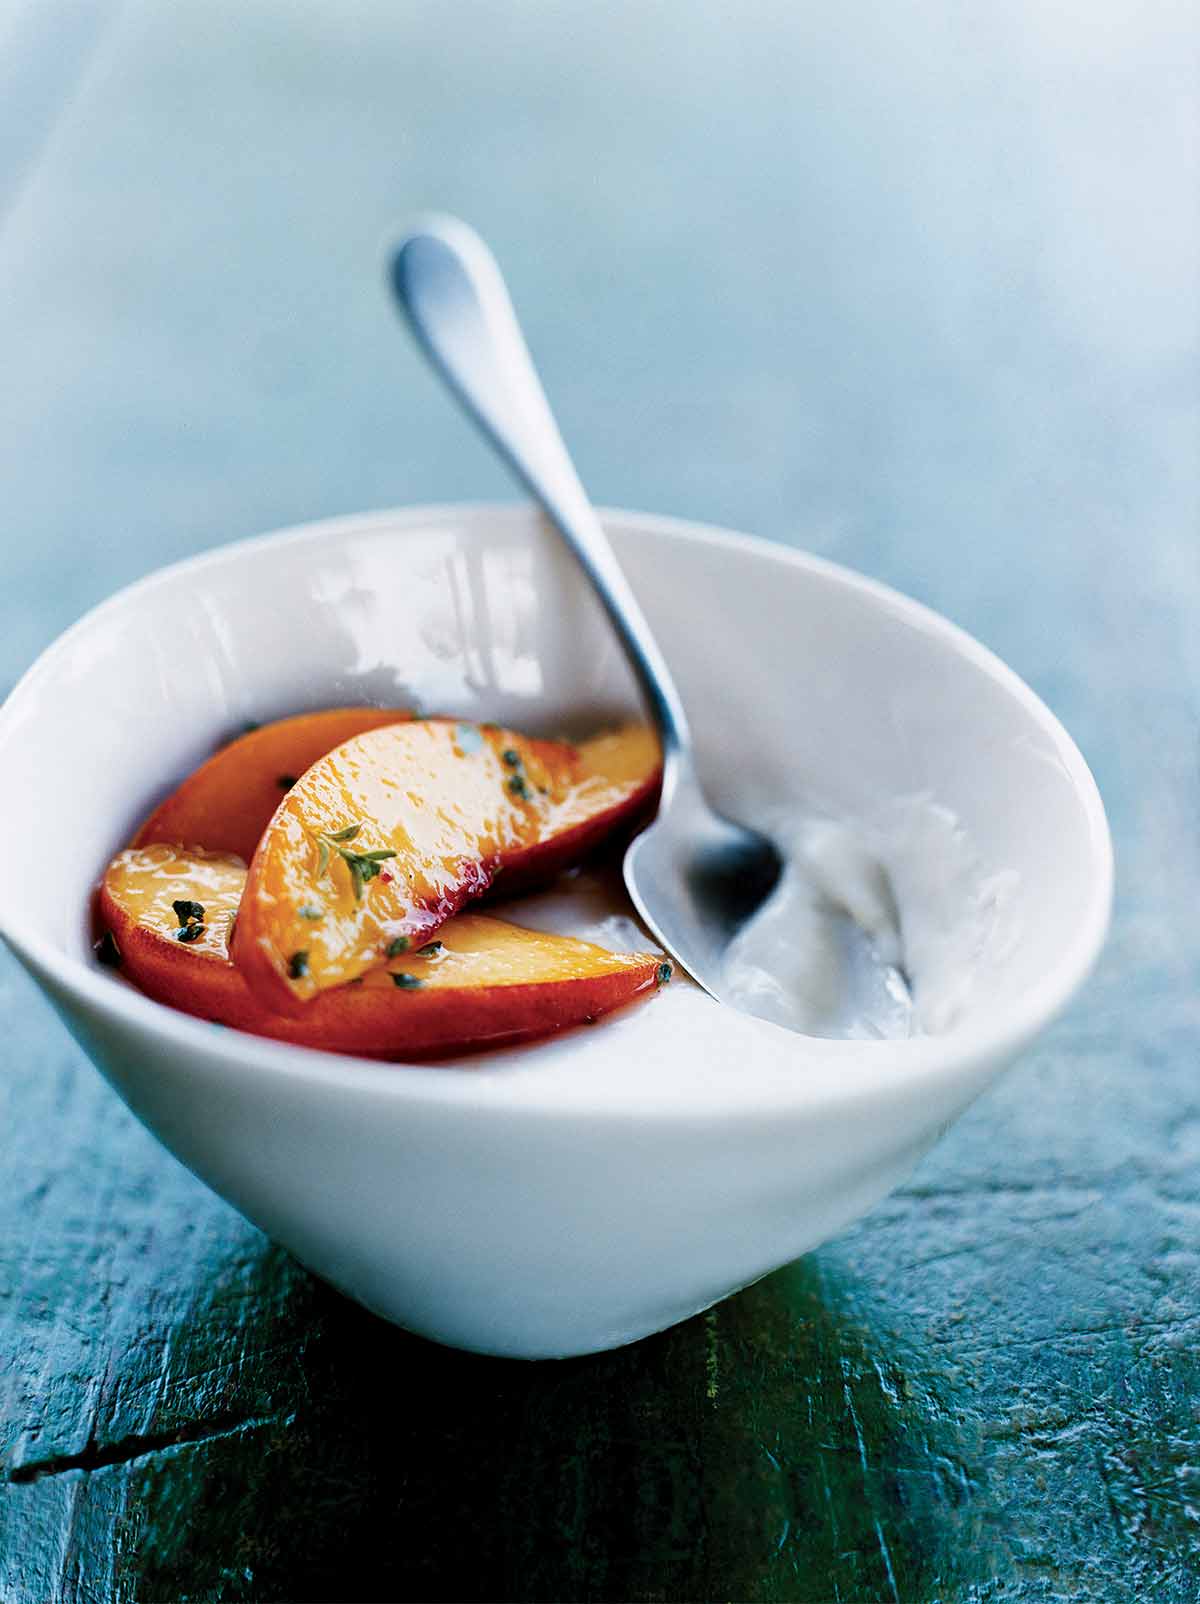 A white bowl filled with panna cotta with peaches, garnished with thyme and a spoon resting inside.